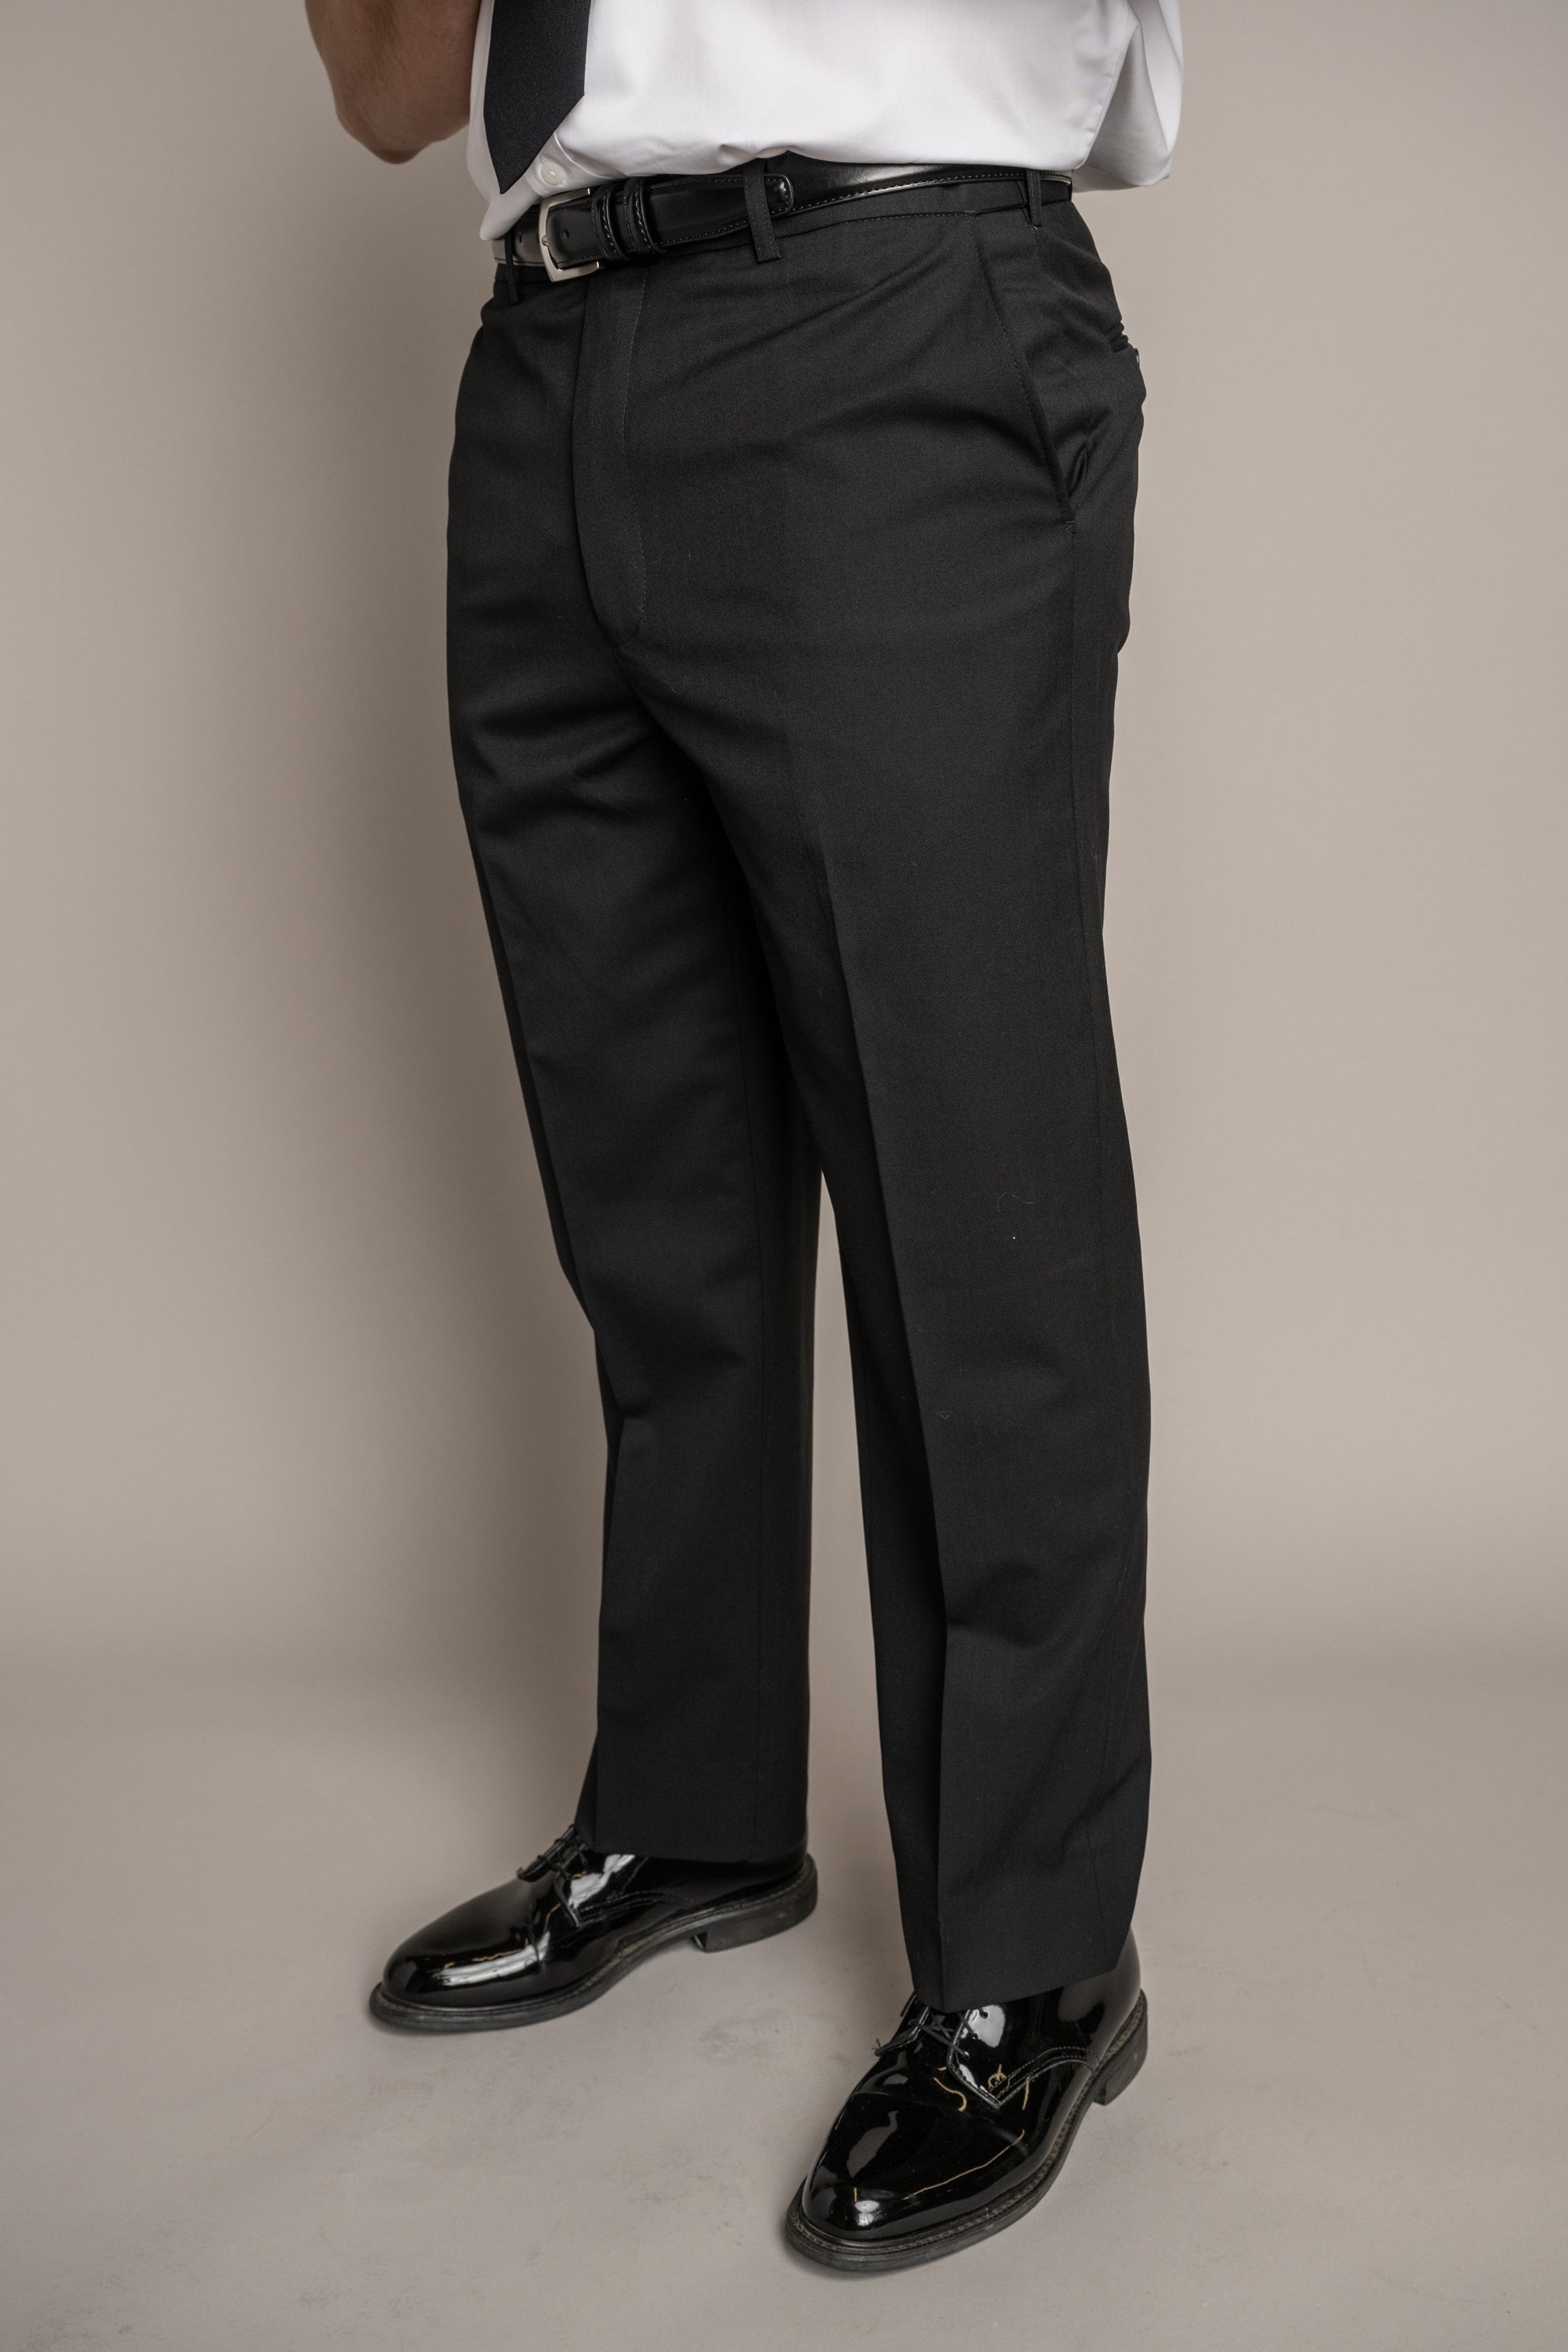 British Style High Waist Mens Pants: Slim Fit, Formal Wear For Office,  Wedding, & Social Events From Mengqiqi02, $15.29 | DHgate.Com